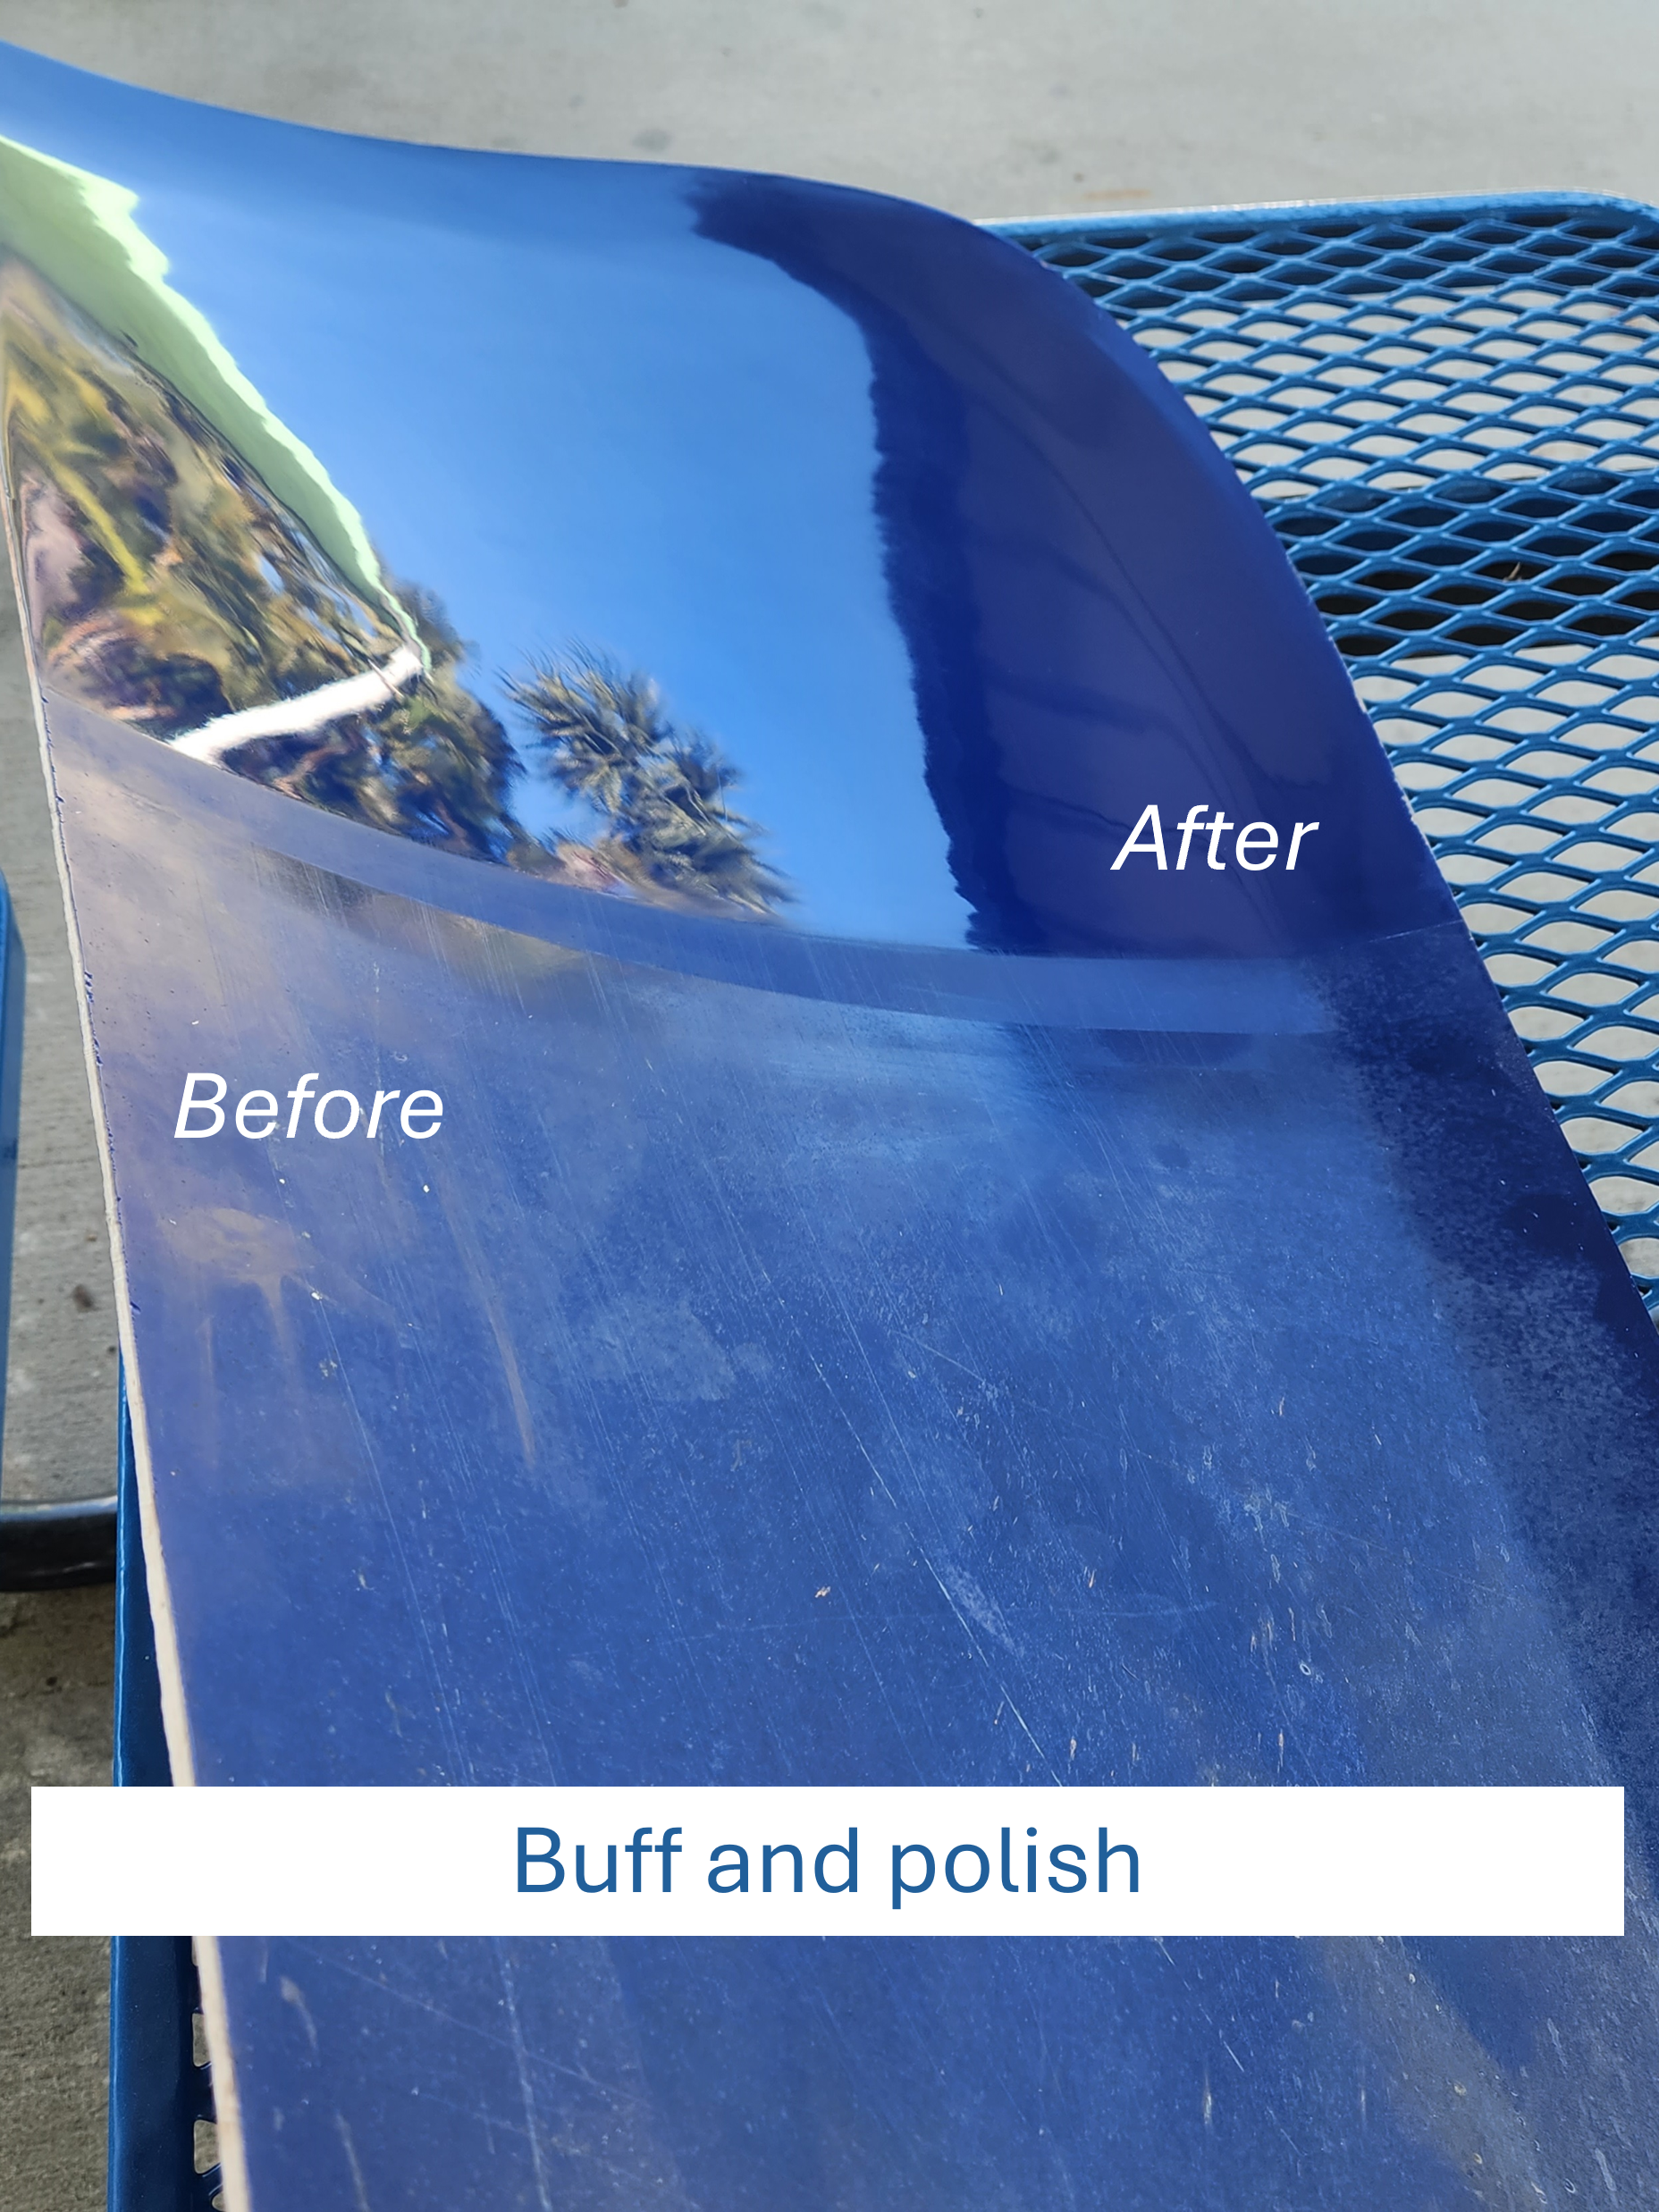 A piece of fiberglass before and after buffing and polishing comparison